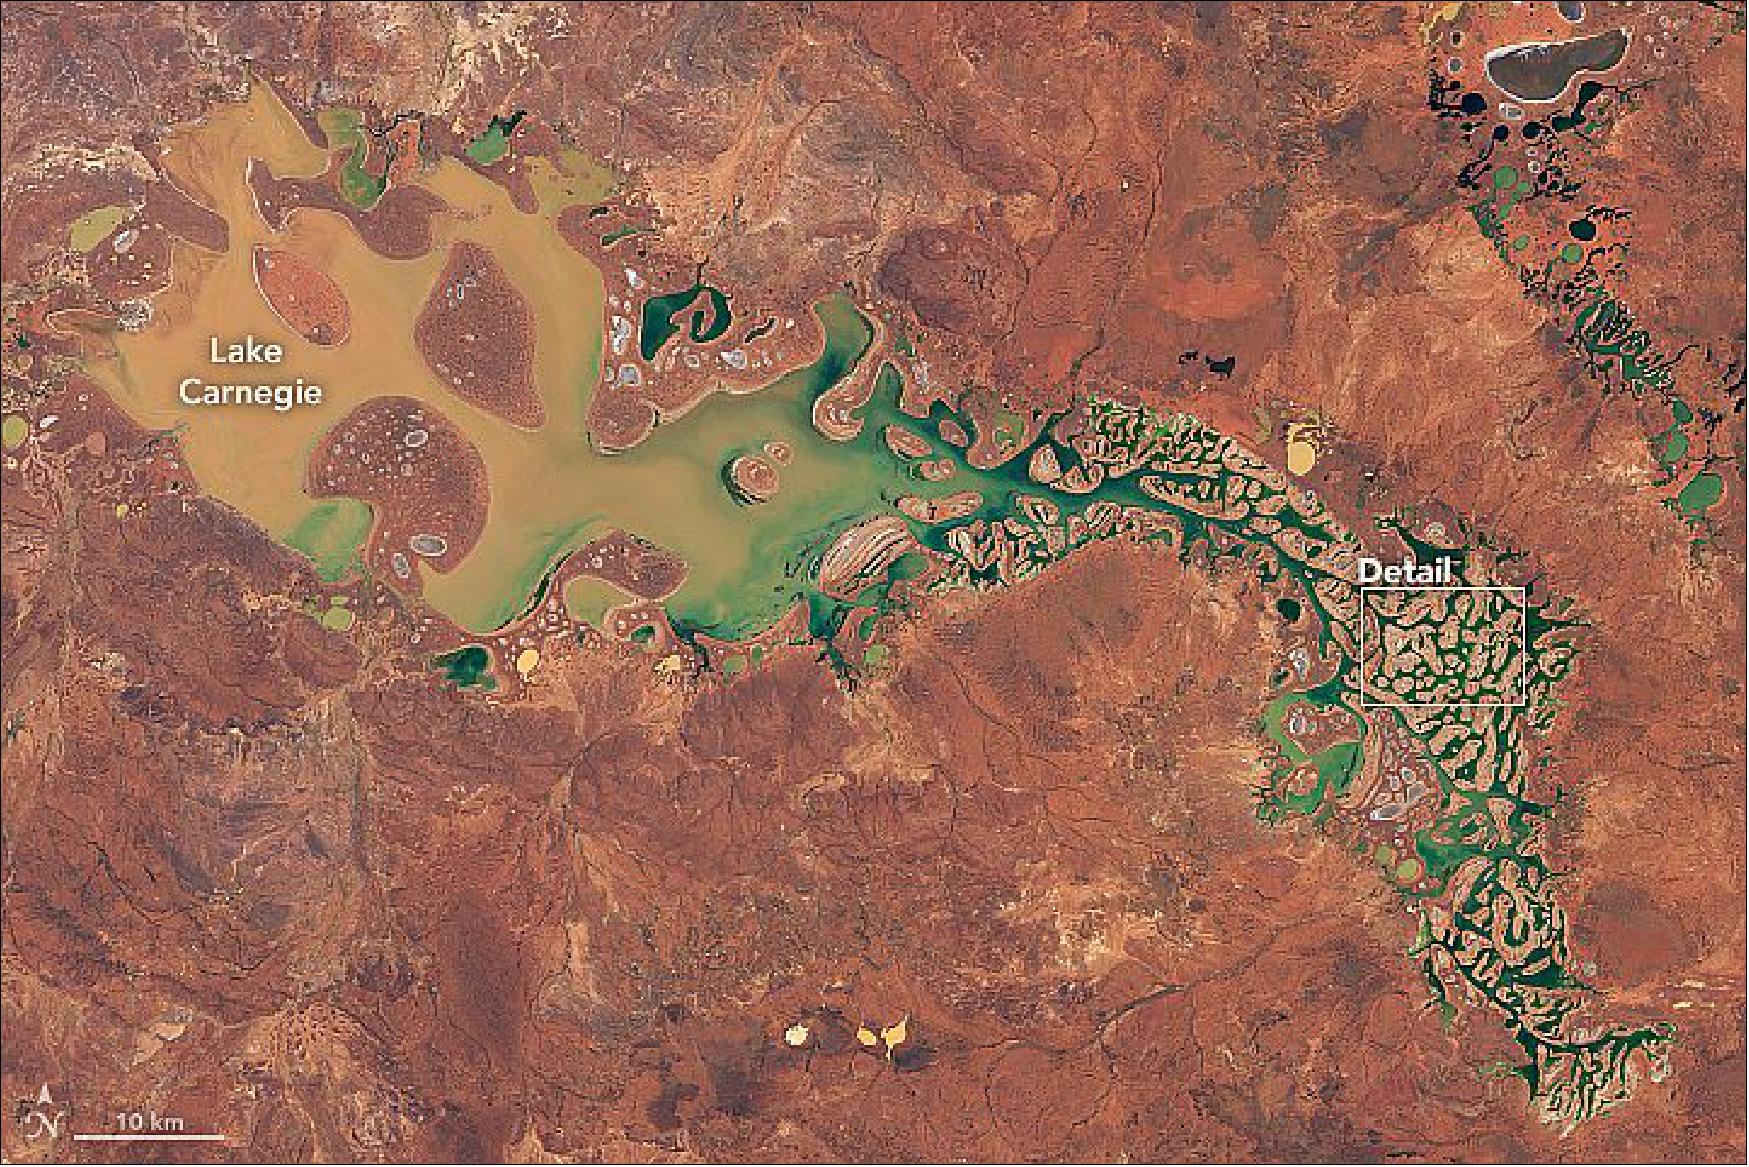 Figure 98: Thanks to a wet summer, water levels rose in this ephemeral lake in Western Australia. OLI image of Lake Carnegie acquired on 26 March 2020 (image credit: NASA Earth Observatory)